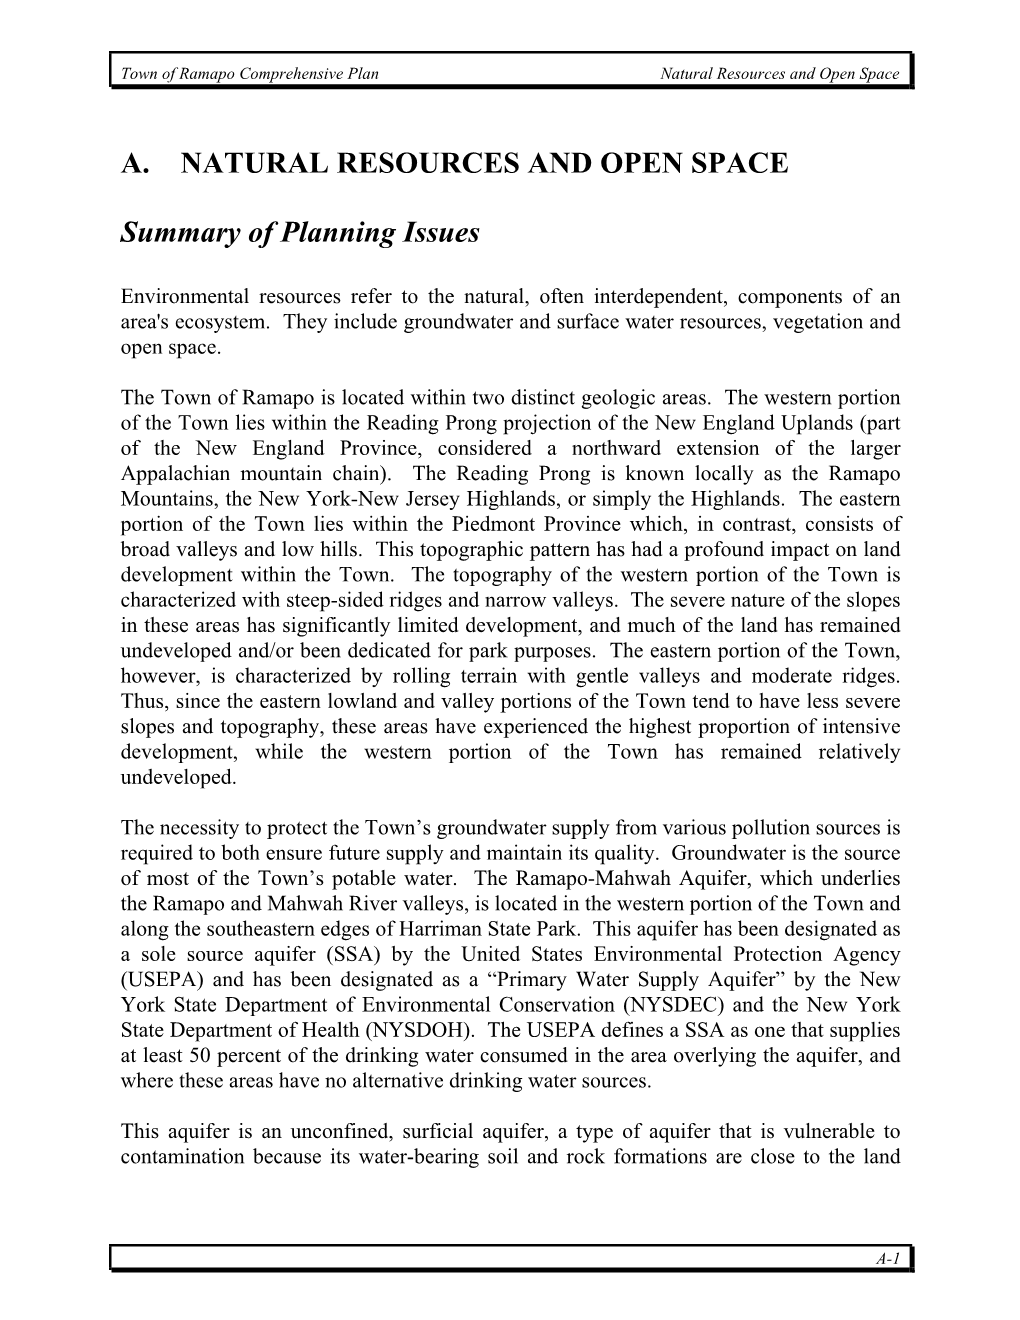 A. Natural Resources and Open Space